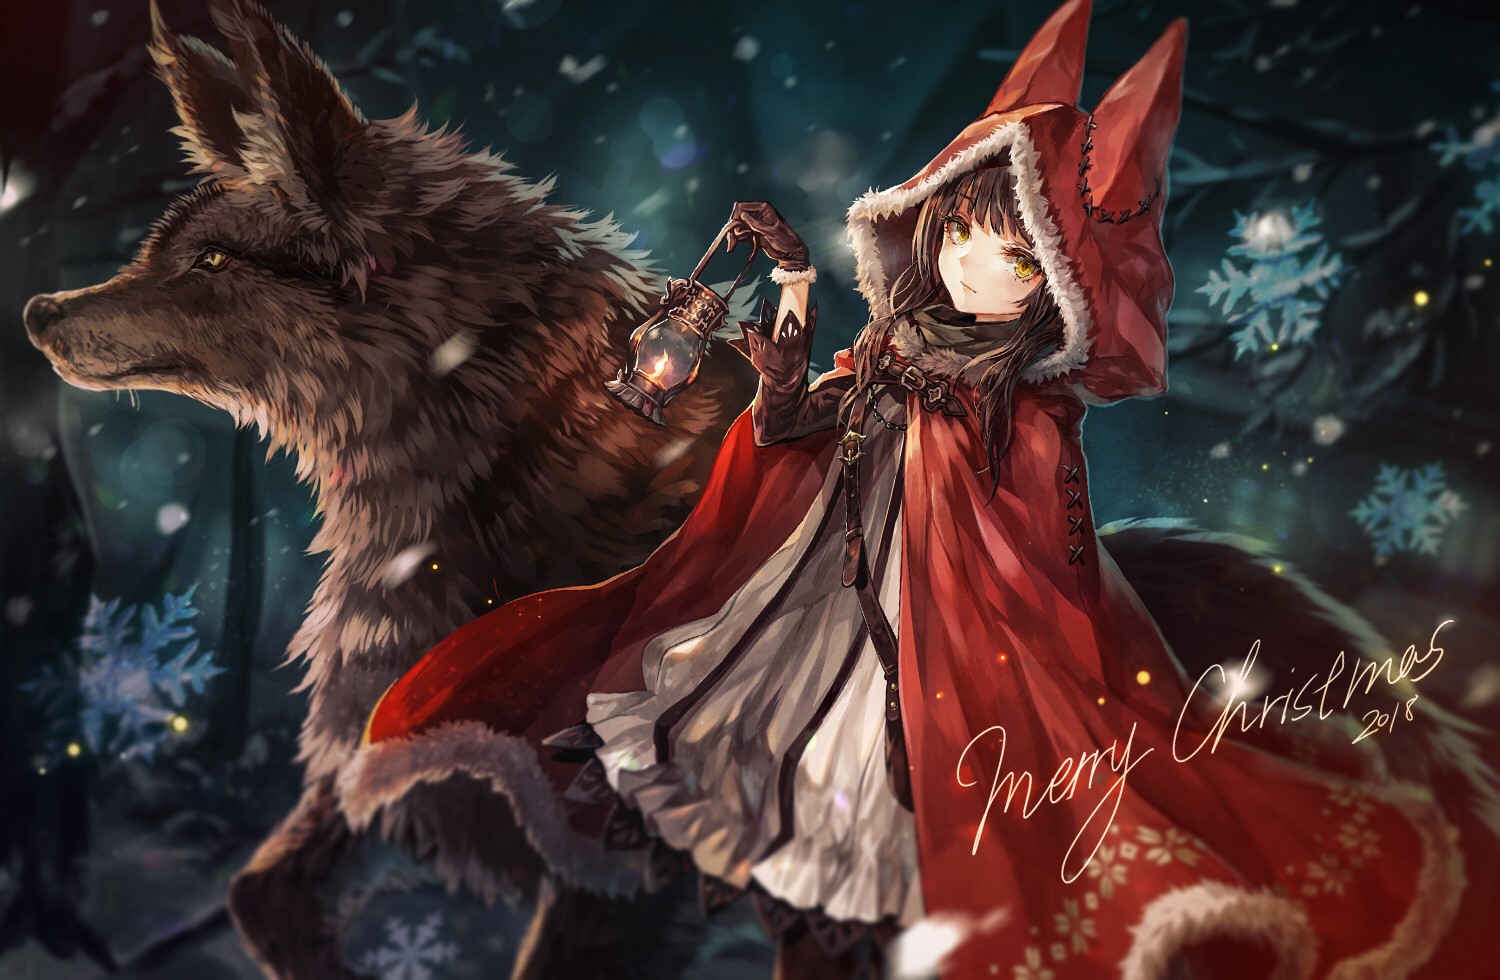 Christmas, pantyhose, wolf, cape, hoods, long hair, gloves, trees, yellow eyes, snow, dress, animal ears, forest, animals, brunette HD Wallpaper